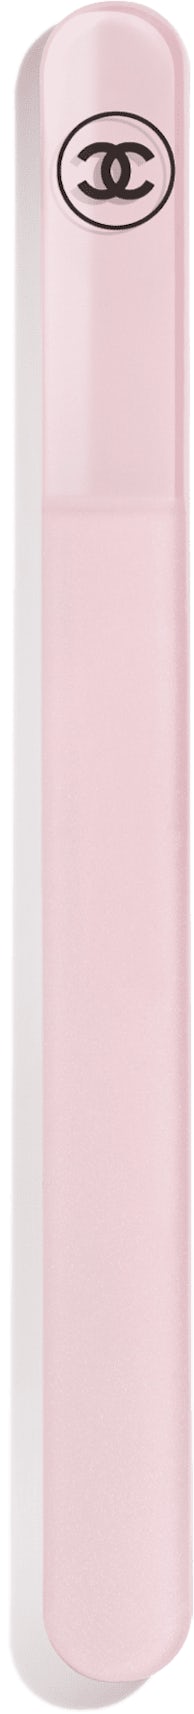 Chanel Codes Couleur Limited-Edition Nail File 111 - BALLERINA